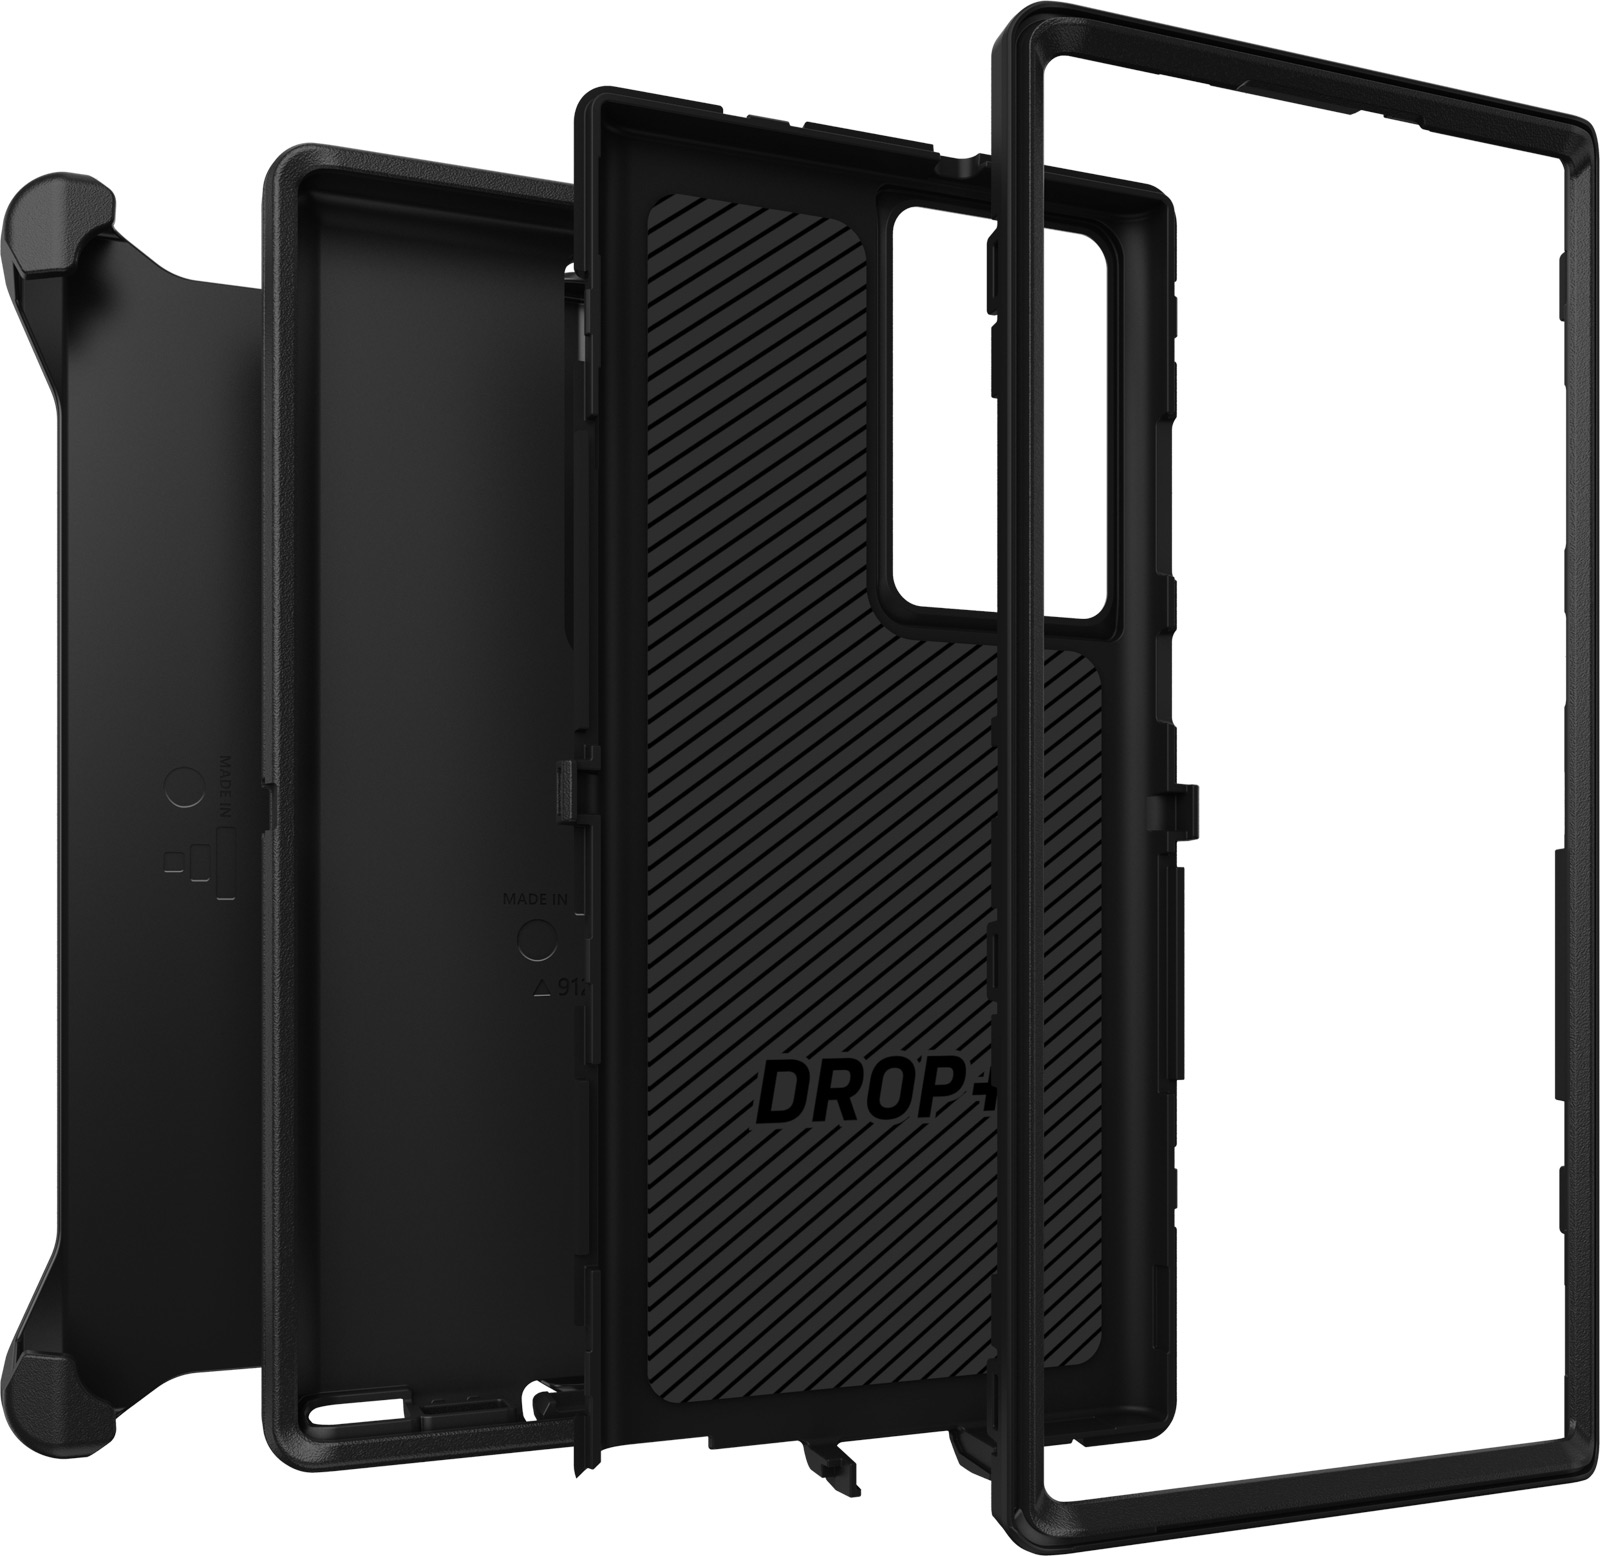 Angled Black OtterBox Galaxy S22 Ultra Defender Case in separate layers